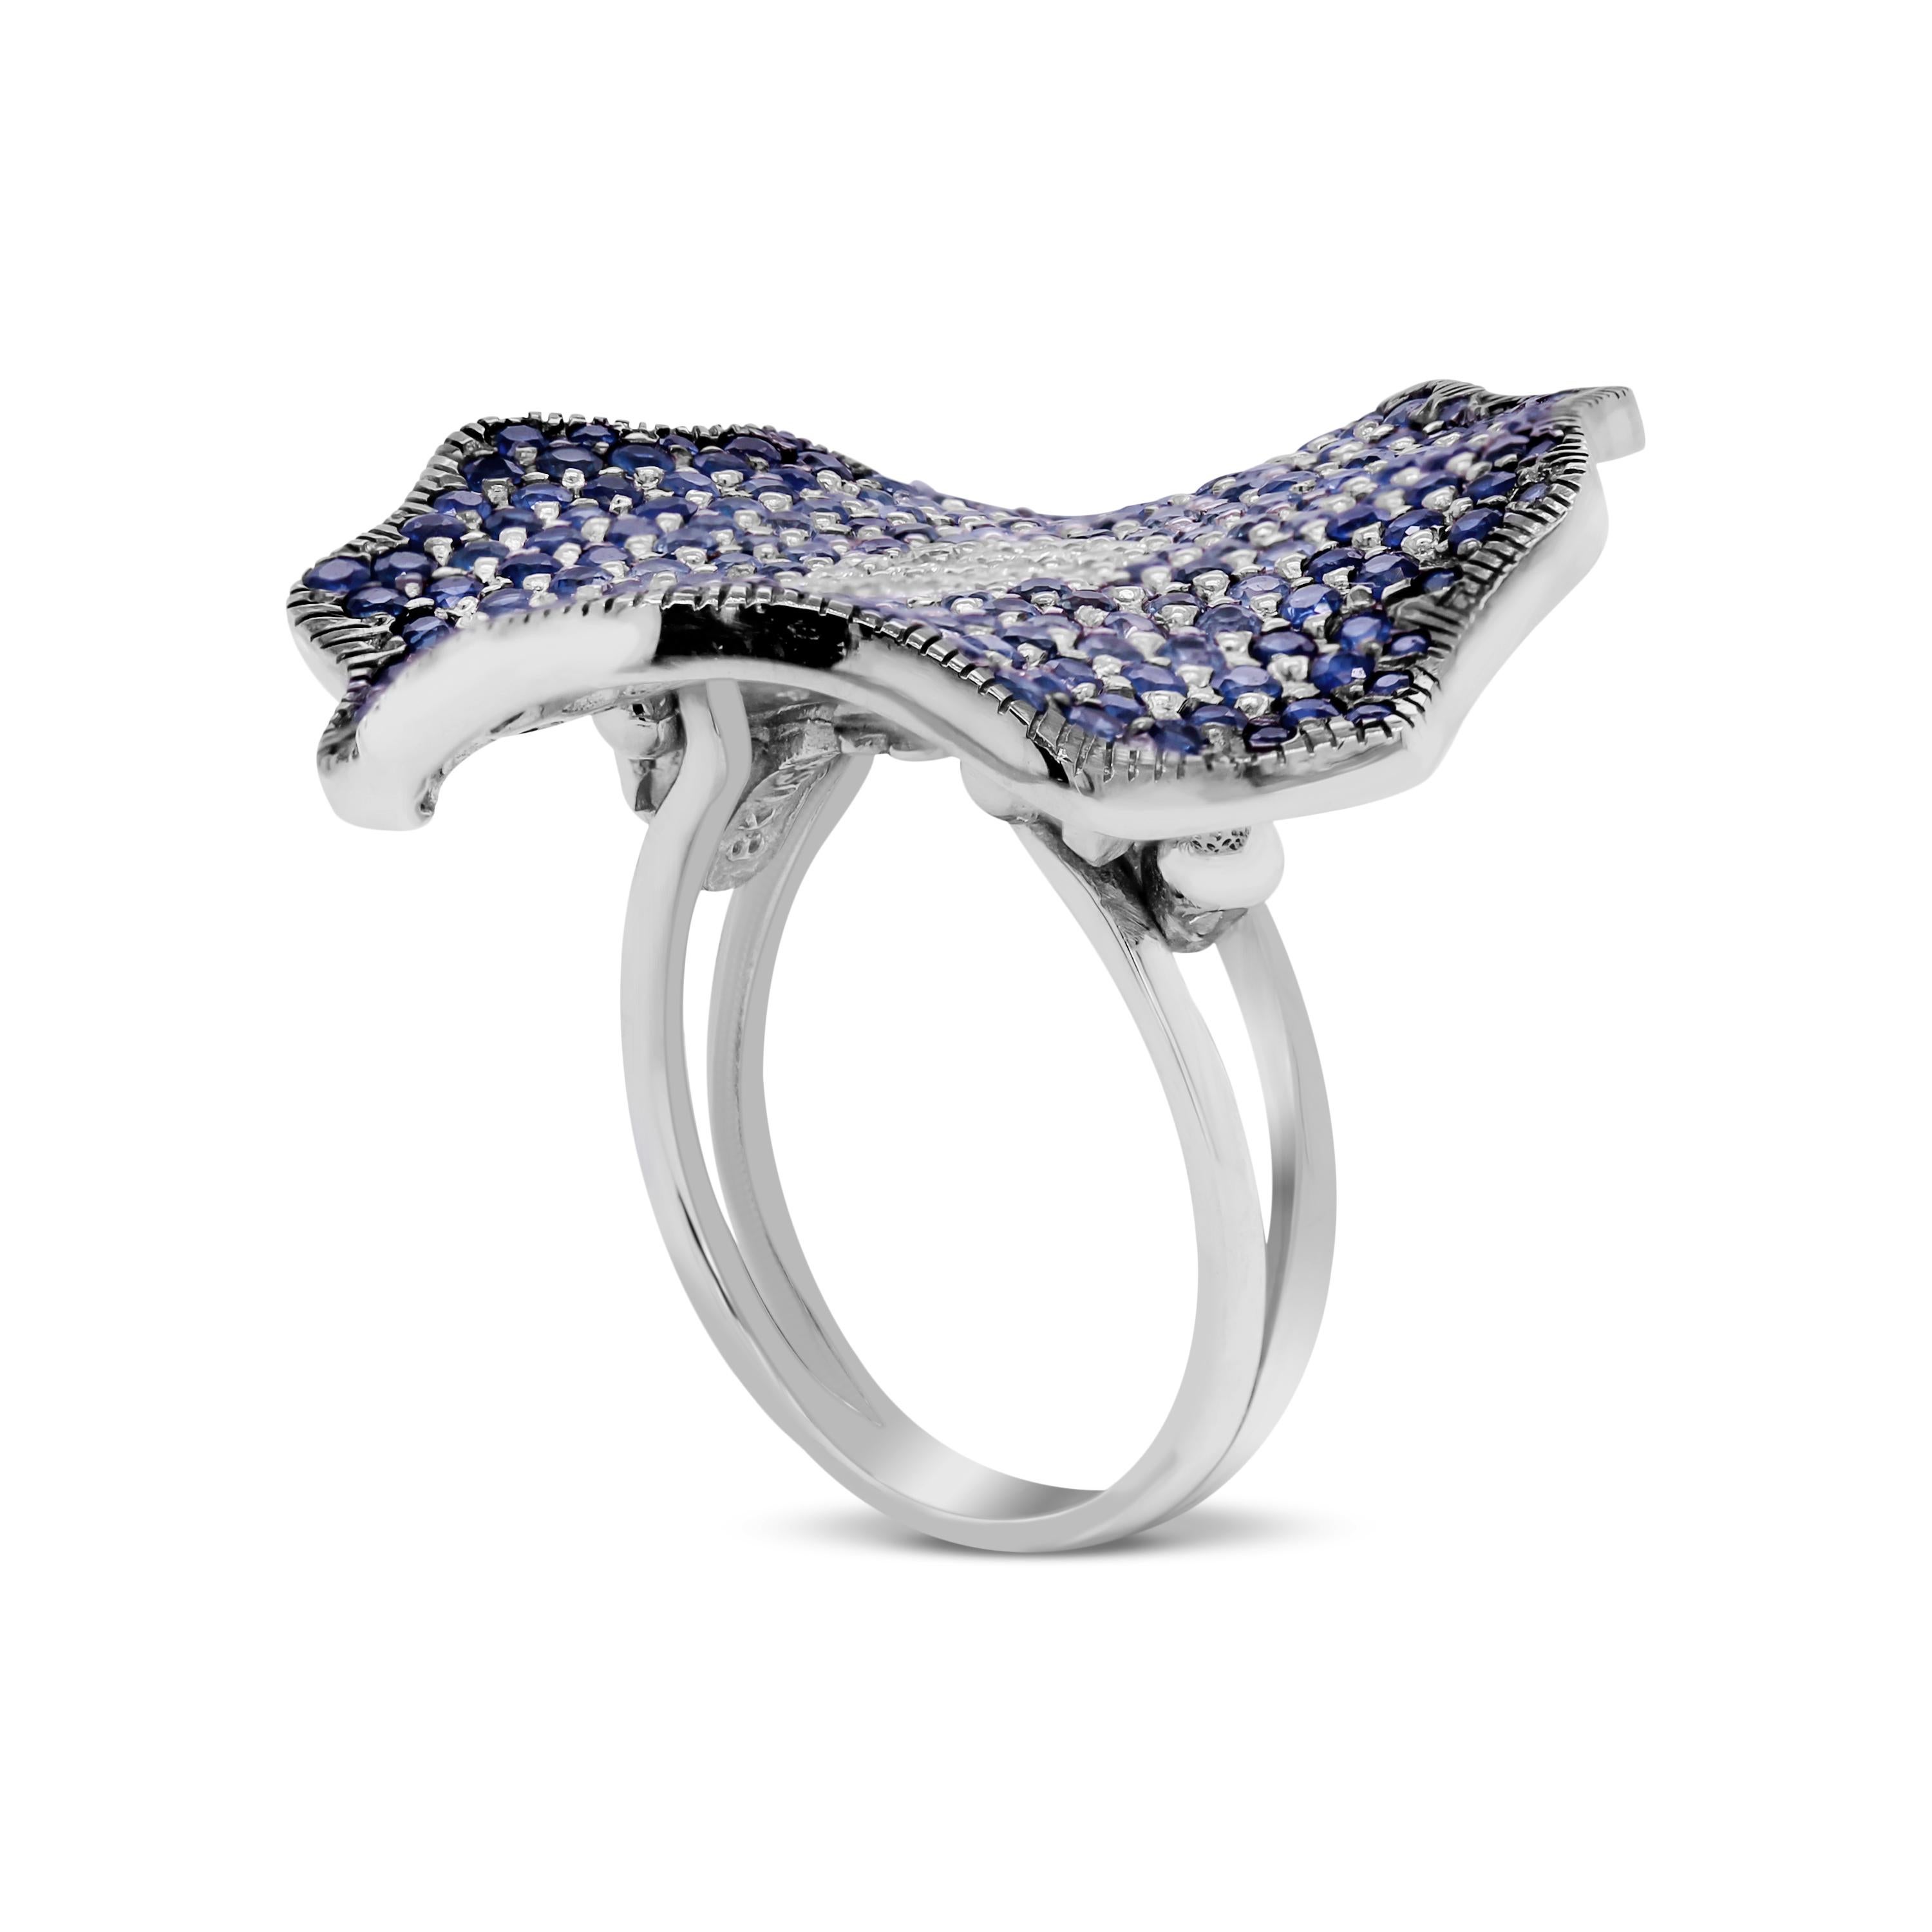 Stambolian 18K White Gold Shaded Dark to Light Blue Sapphire and Diamond Ring

This state-of-the-art ring by Stambolian features and curved, abstract shaped design with sapphires beginning with the darker on the outside, gradually shading lighter